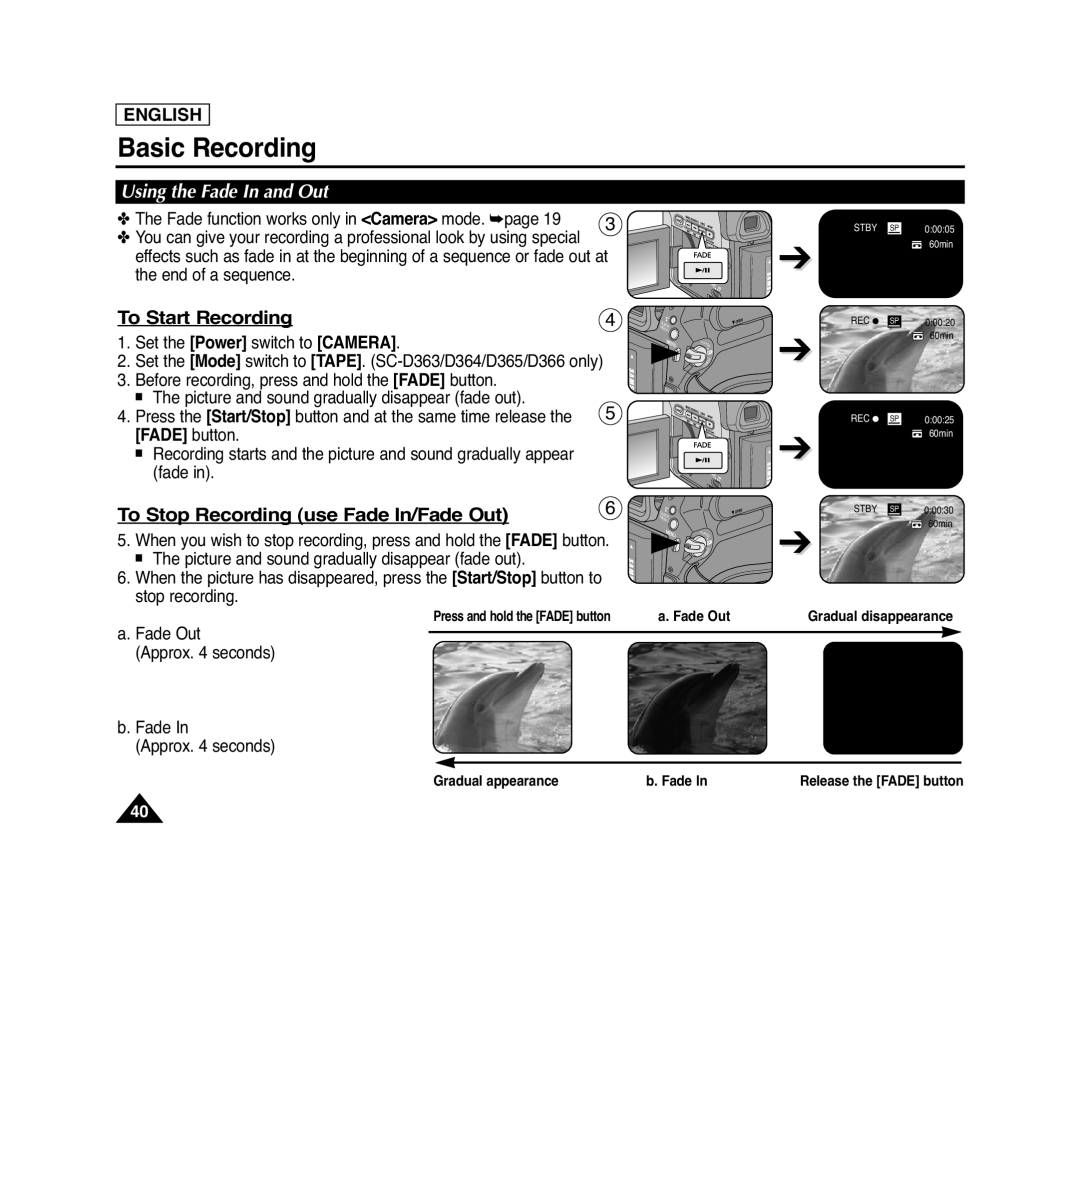 Samsung SC-D263 manual To Start Recording, To Stop Recording use Fade In/Fade Out, Using the Fade In and Out, FADE button 